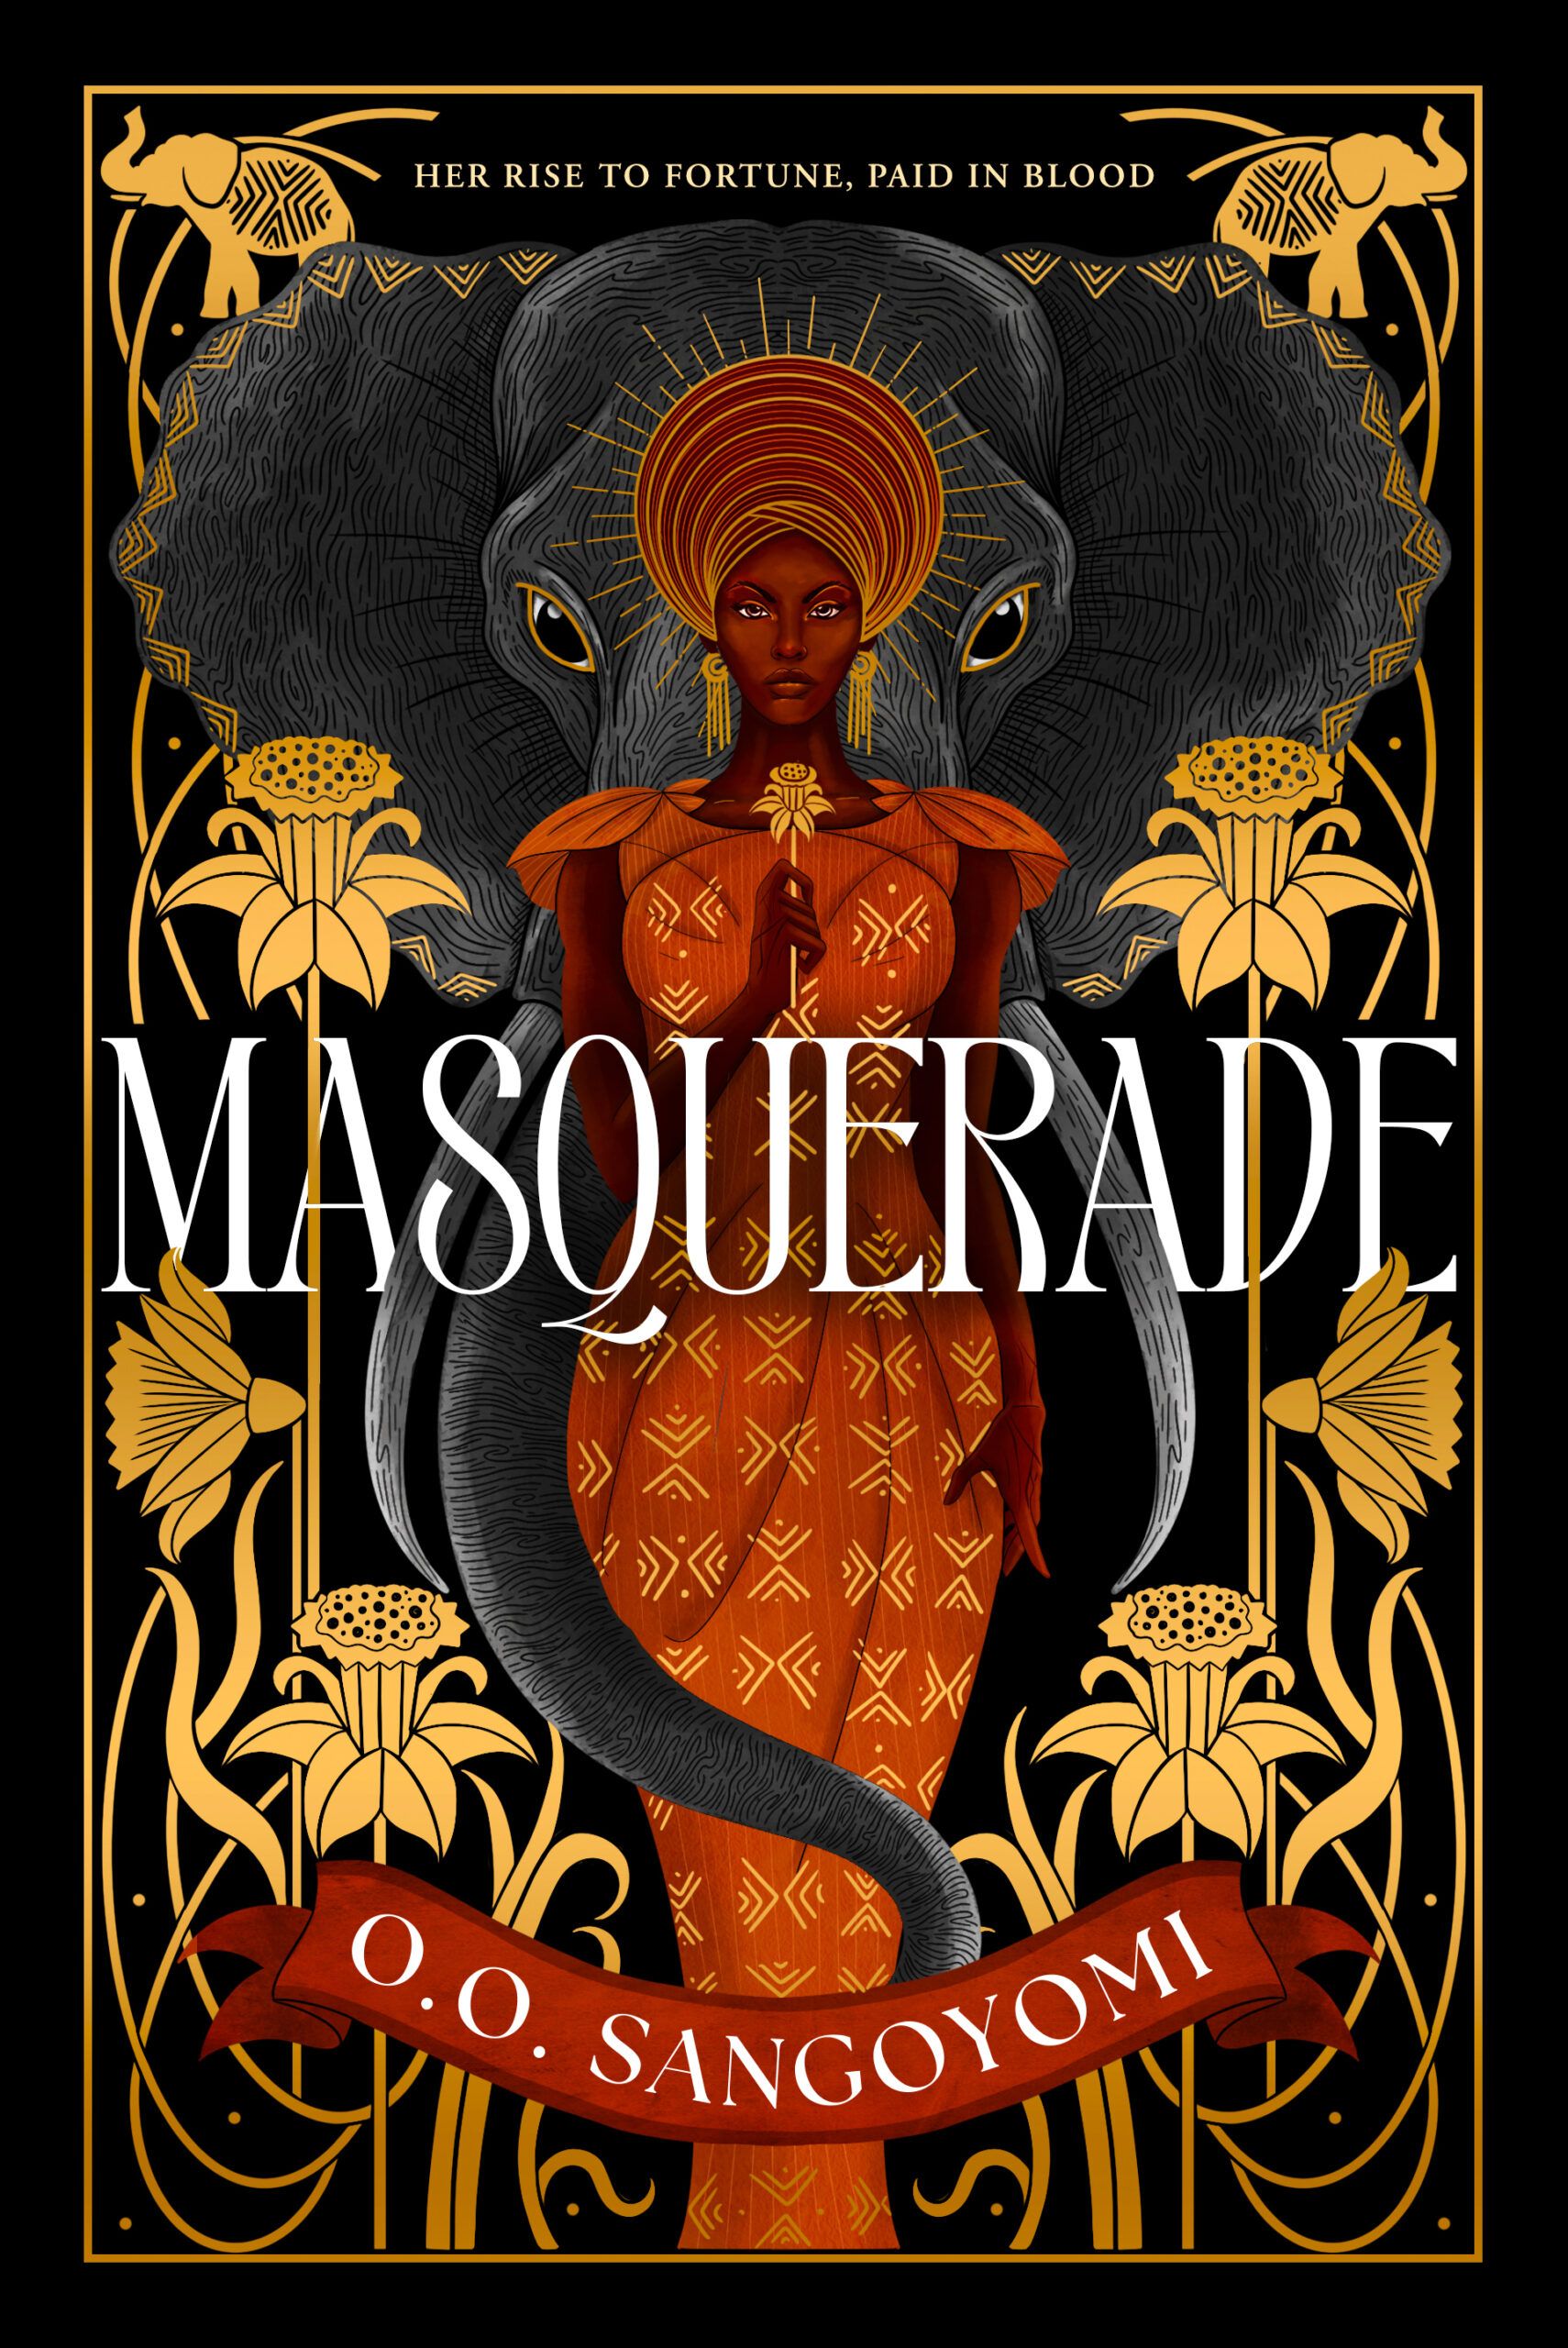 Cover of Masquerade by OO Sangoyomi